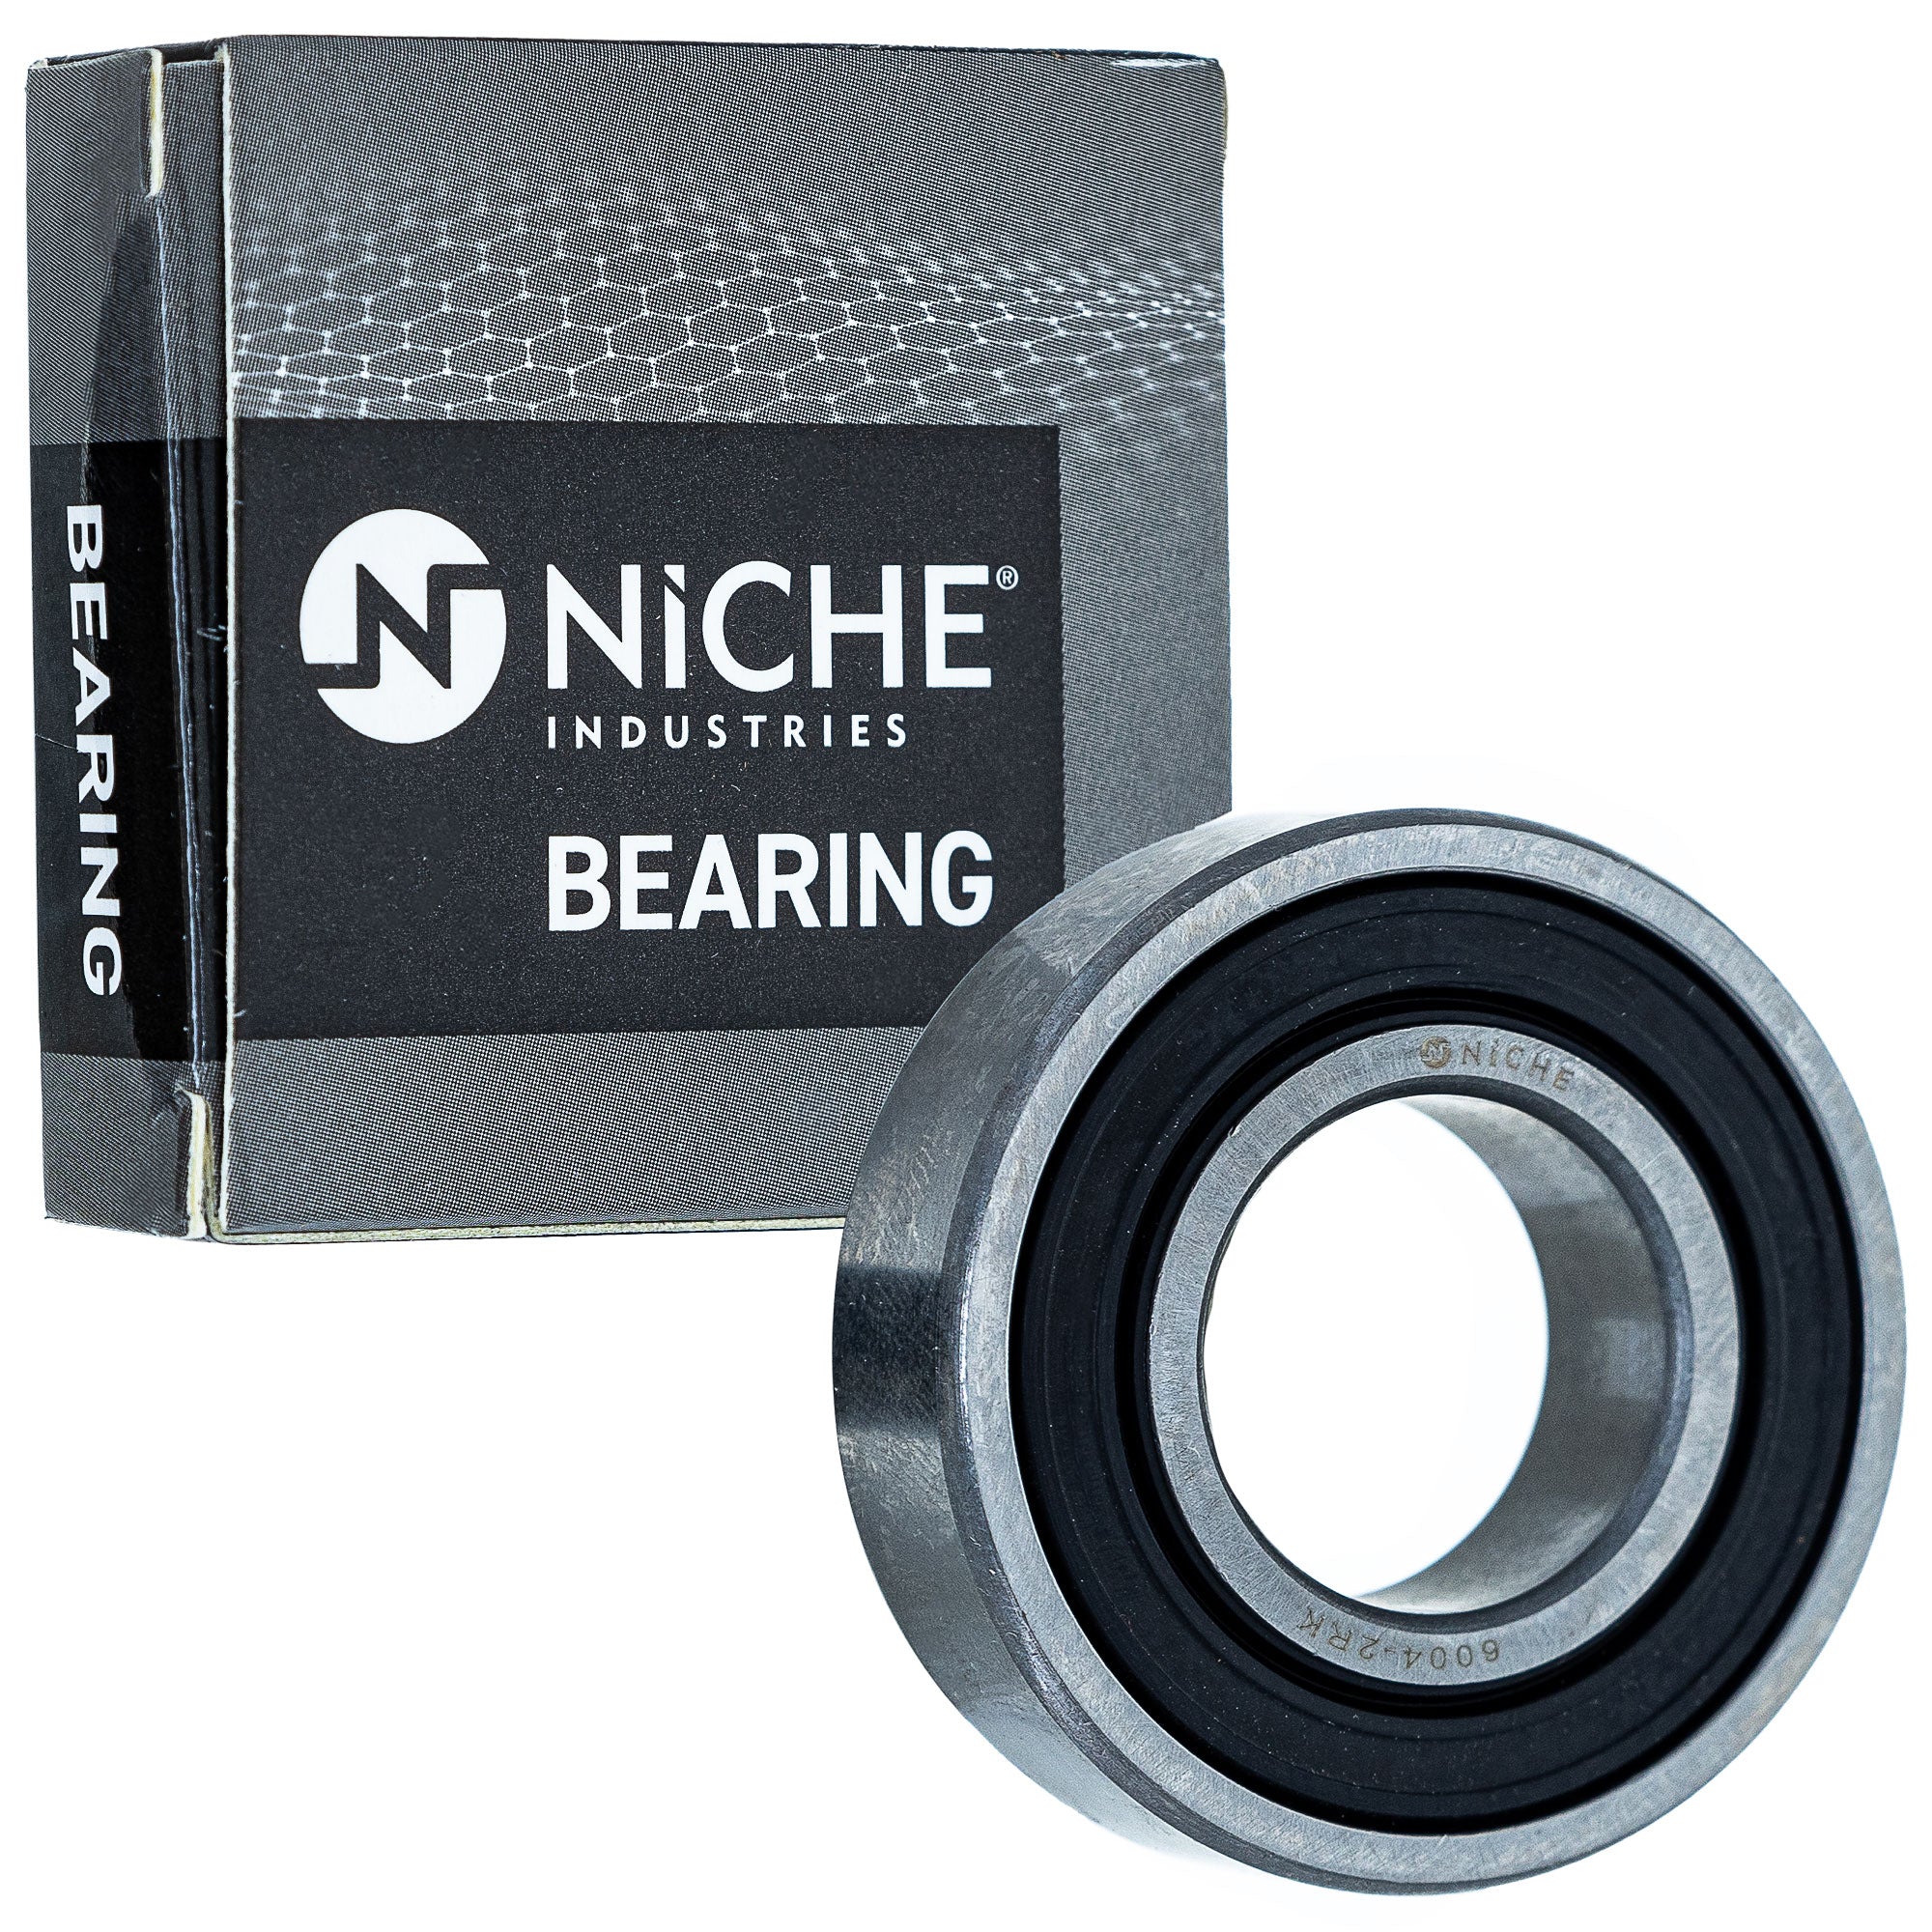 NICHE 519-CBB2295R Bearing & Seal Kit 10-Pack for zOTHER YZ400F